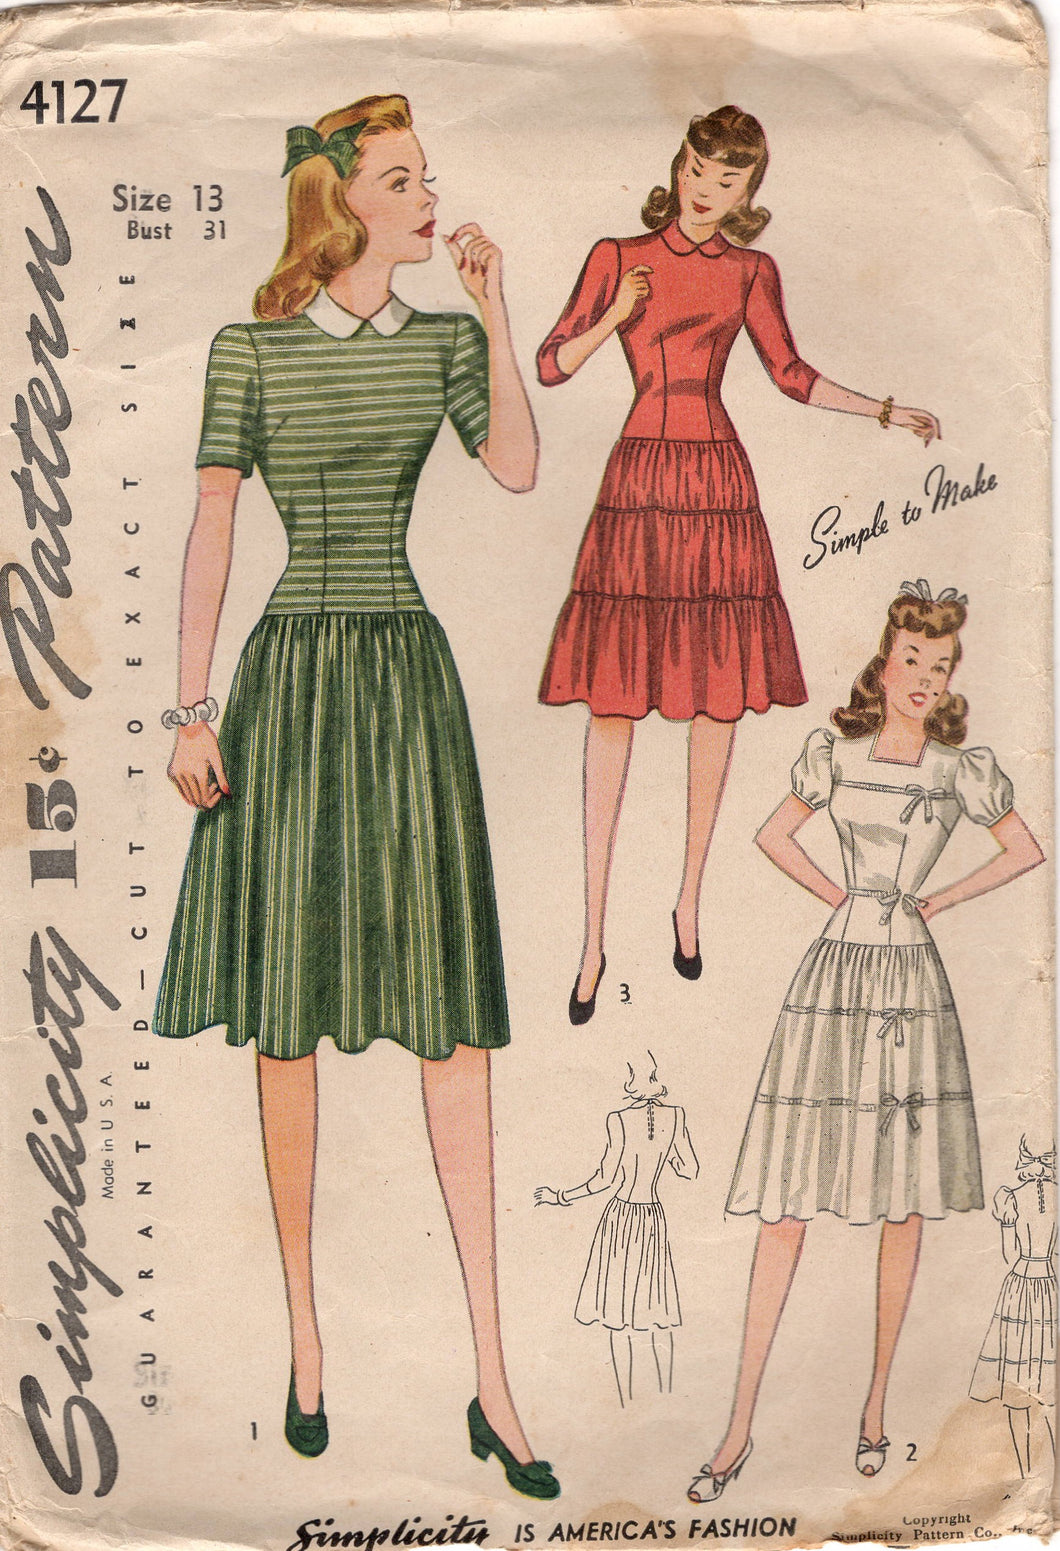 1940's Simplicity One Piece Dress Pattern with Drop Waist Gathered Skirt and Peter Pan Collar - Bust 31